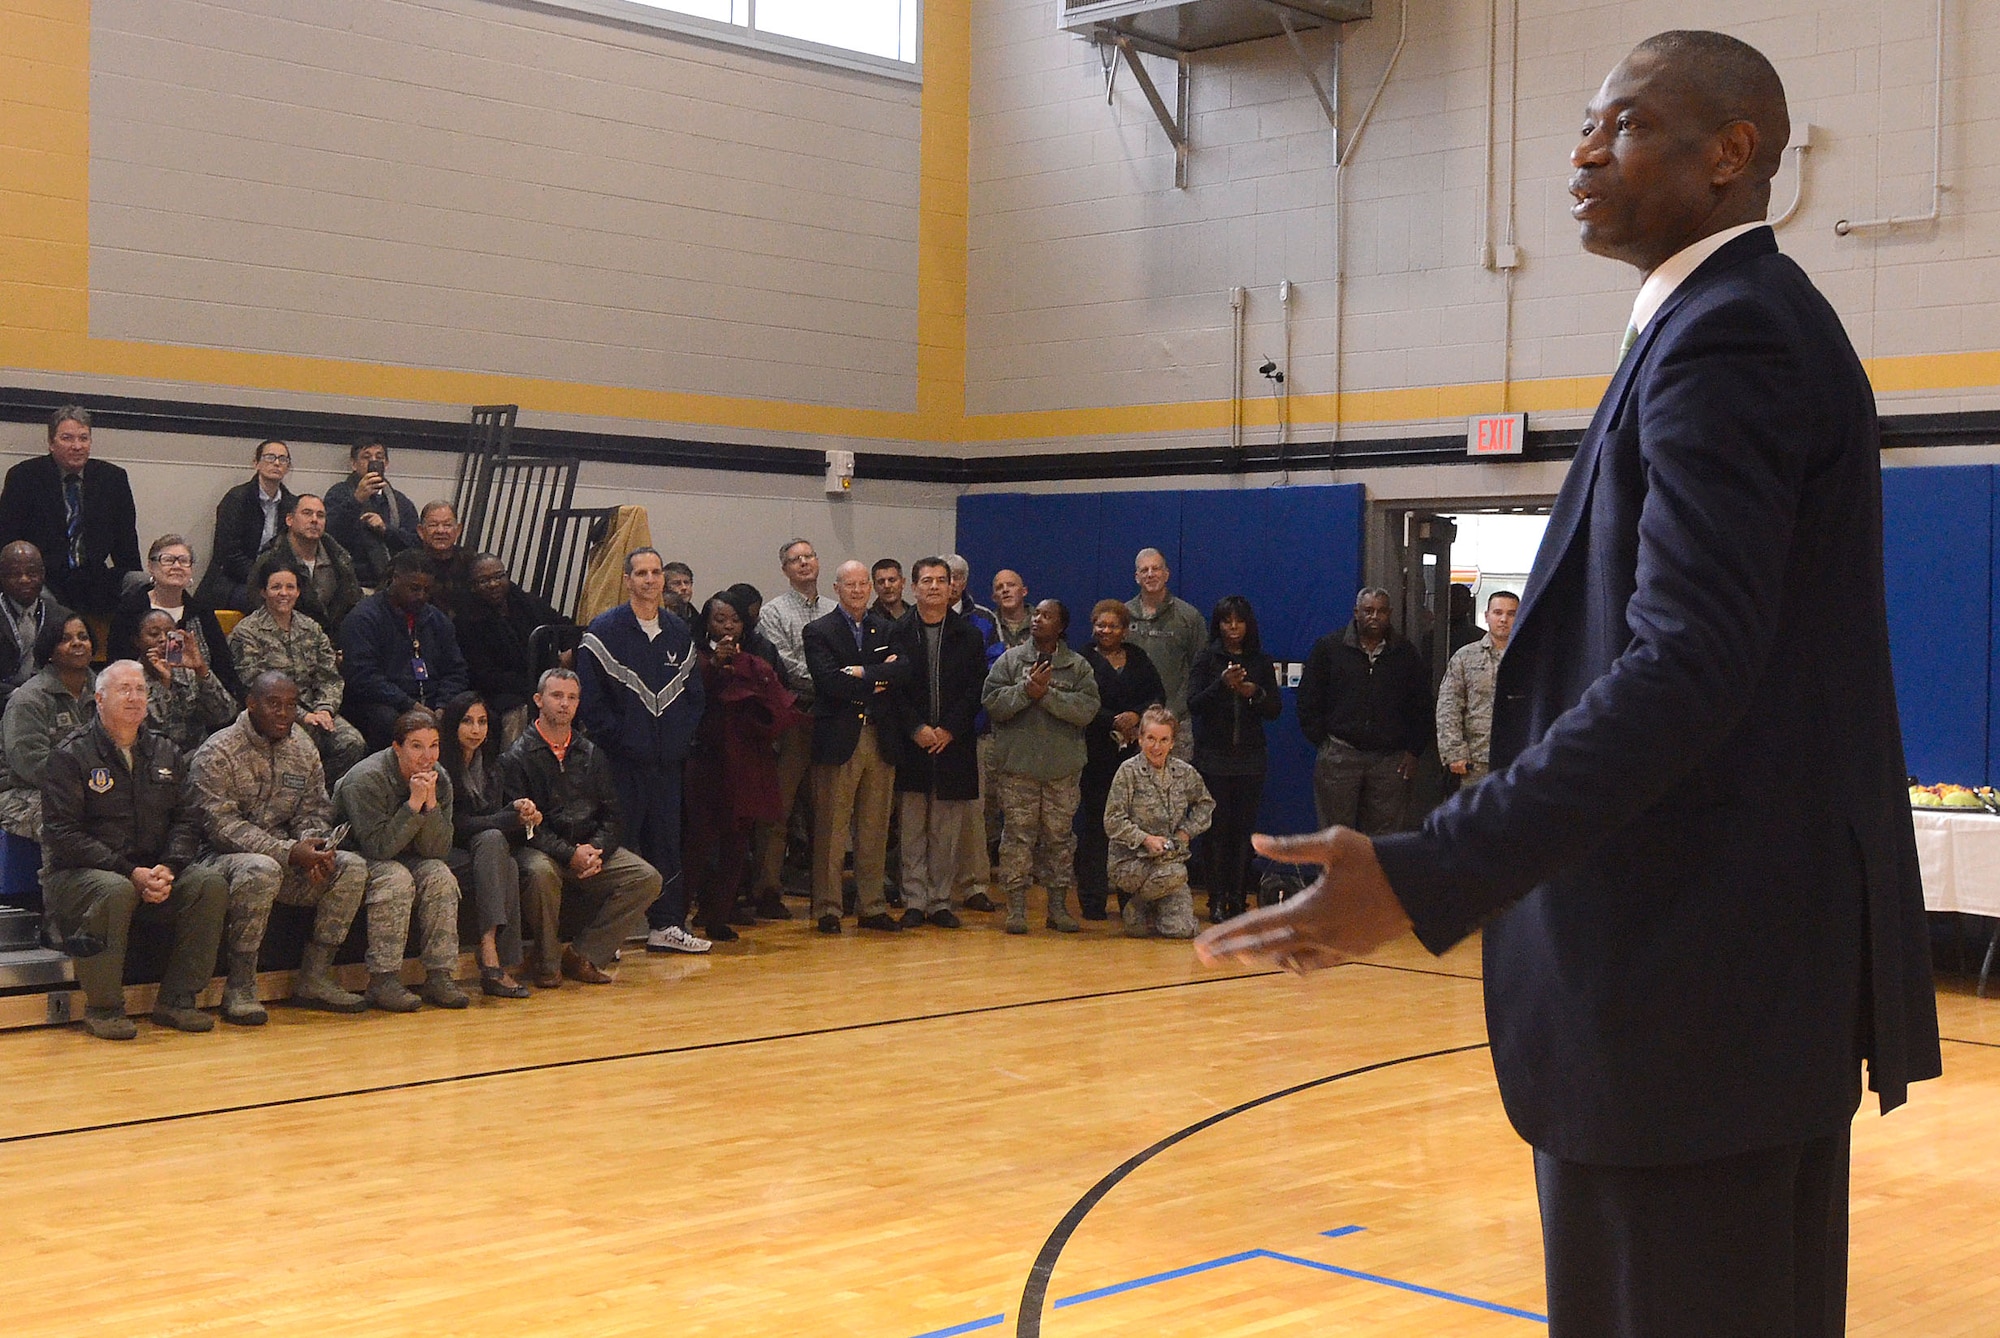 Dikembe Mutombo, NBA Hall of Famer, speaks to members of Team Dobbins at the grand opening of the renovated fitness center at Dobbins Air Reserve Base, Ga. Nov. 18, 2014. The fitness center includes approximately 30 new pieces of equipment. (U.S. Air Force photo by Don Peek/Released)